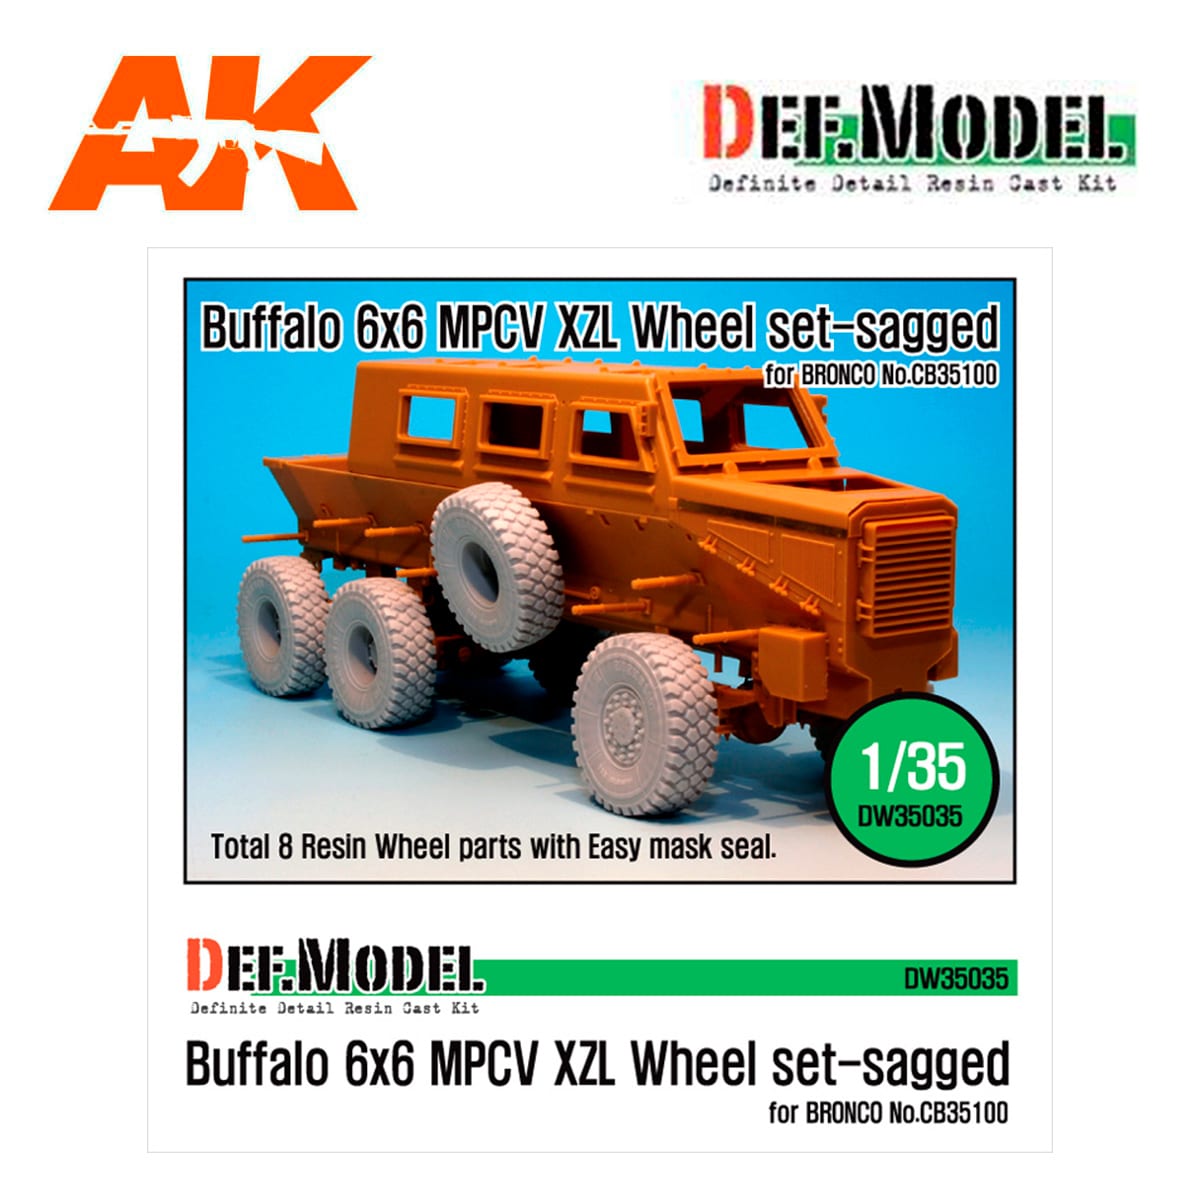 Buffalo 6x6 MPCV Mich. XZL Sagged Wheel set(for Bronco 1/35) | AK Interactive The weathering #Brand